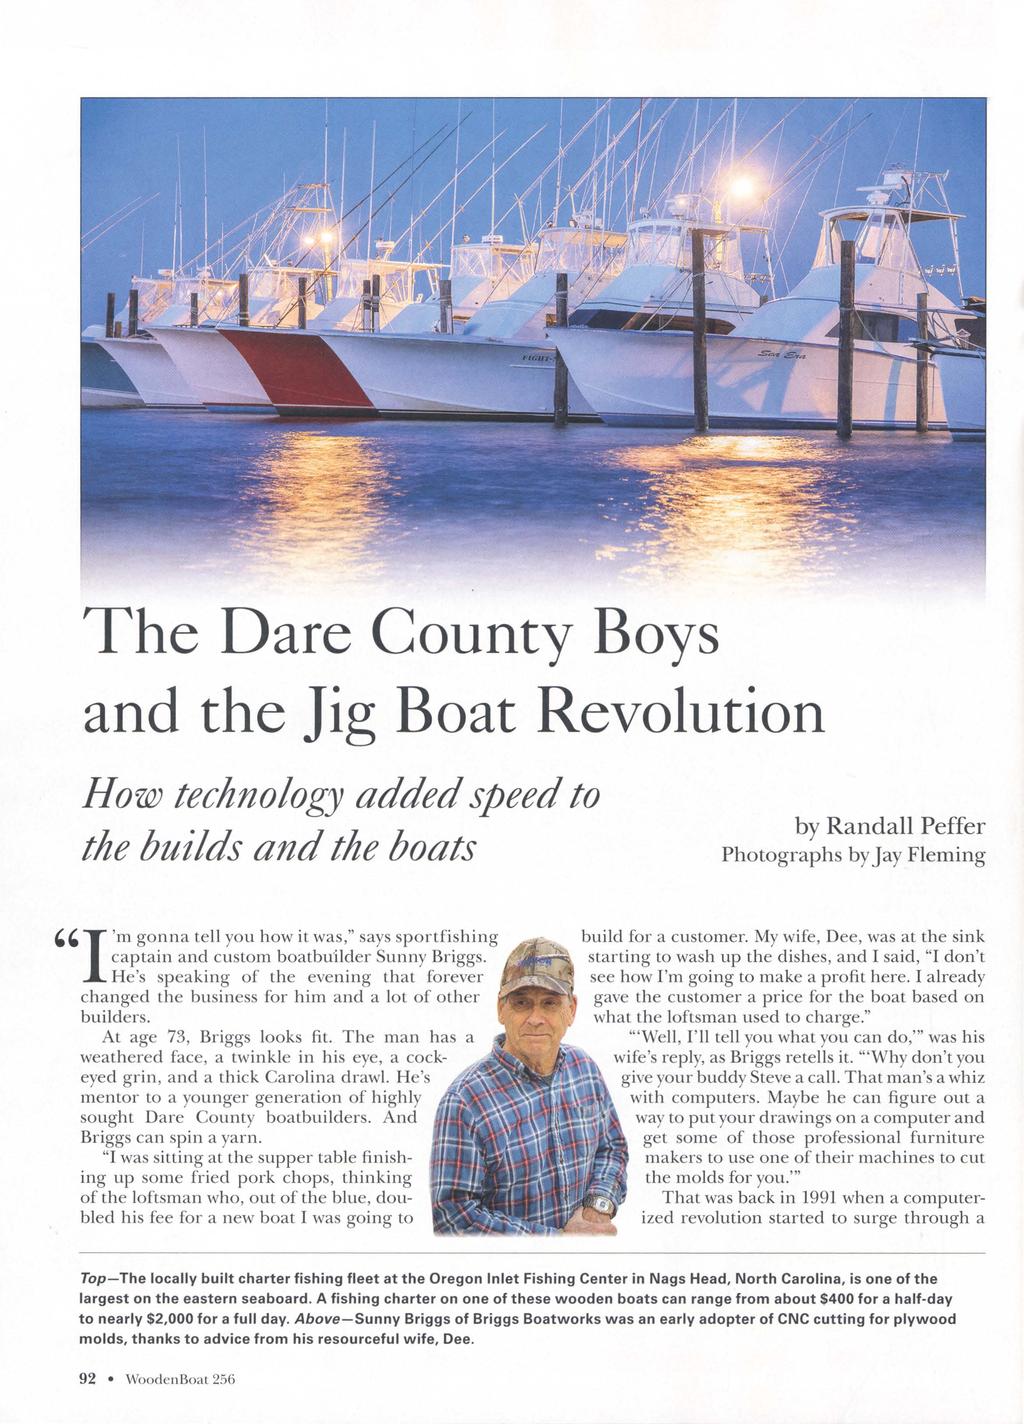 The Dare County Boys and the Jig Boat Revolution How technology added speed to the builds and the boats by Randall Peffer Photographs by Jay Fleming,, I 'm go:1na tell you how it wa_s," says